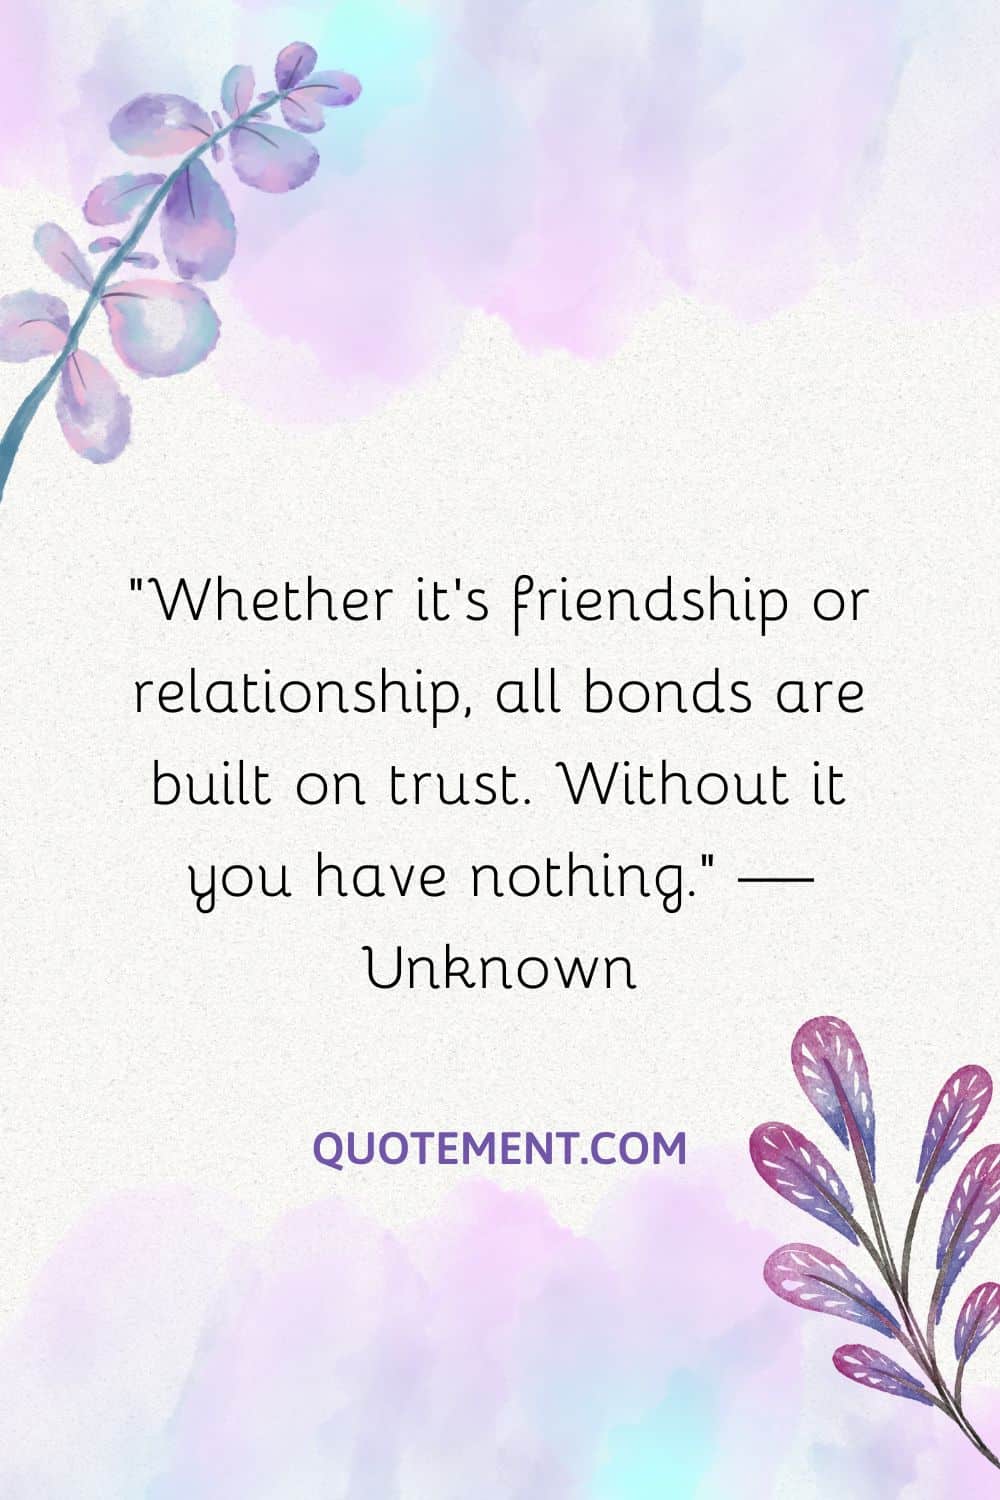 Whether it’s friendship or relationship, all bonds are built on trust. Without it you have nothing.